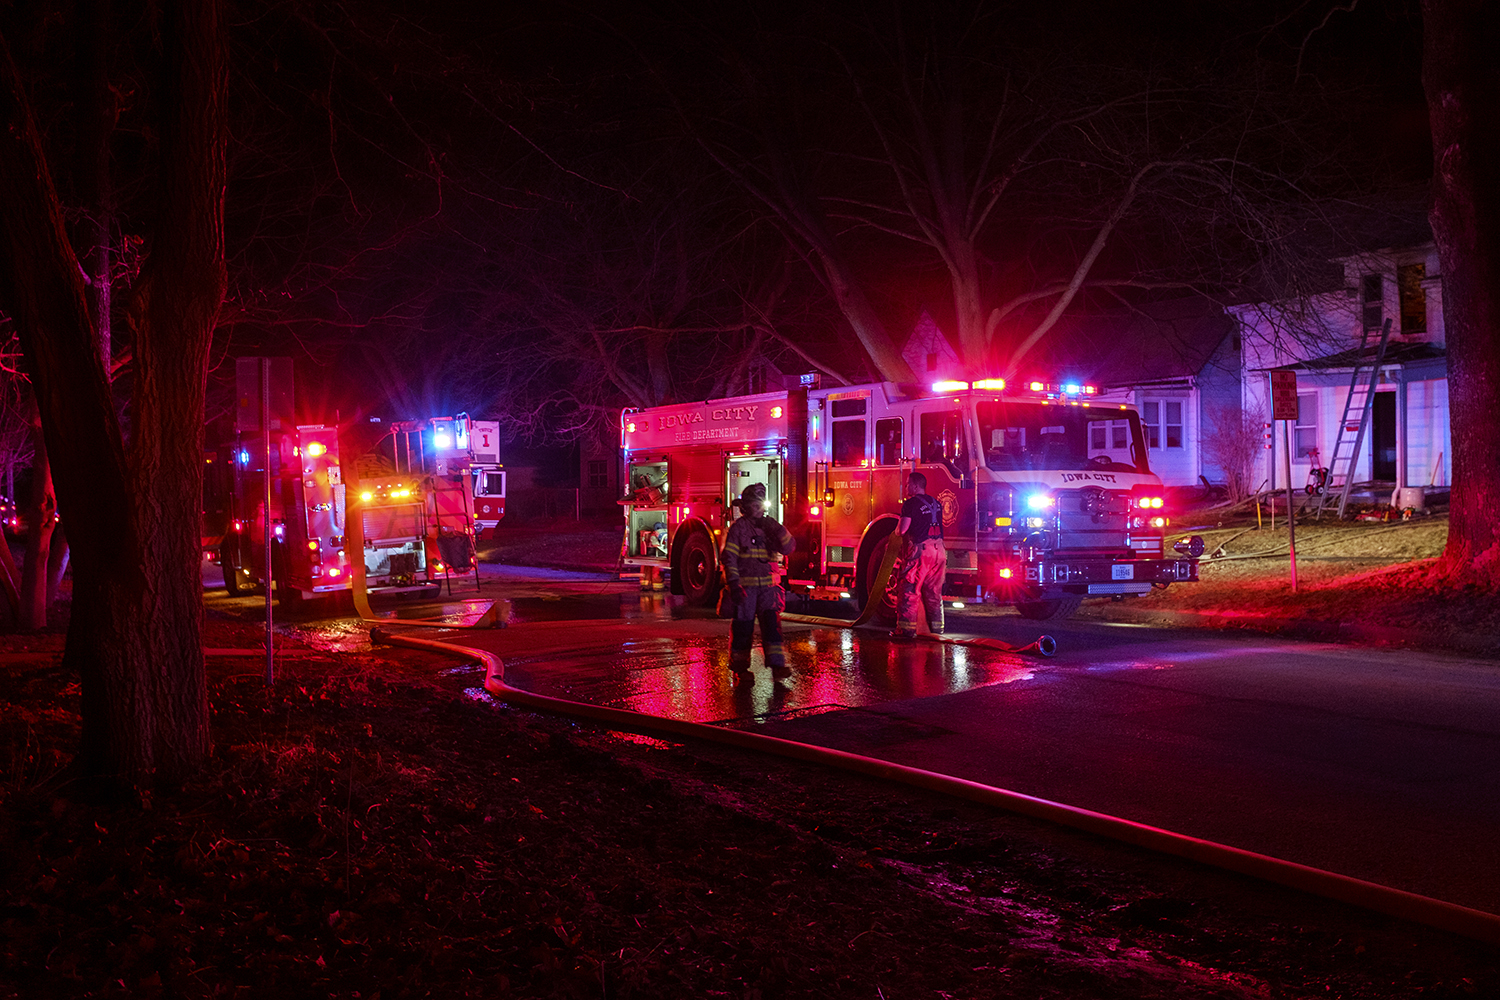 Fire causes estimated 20,000 in damage to Iowa City residence The